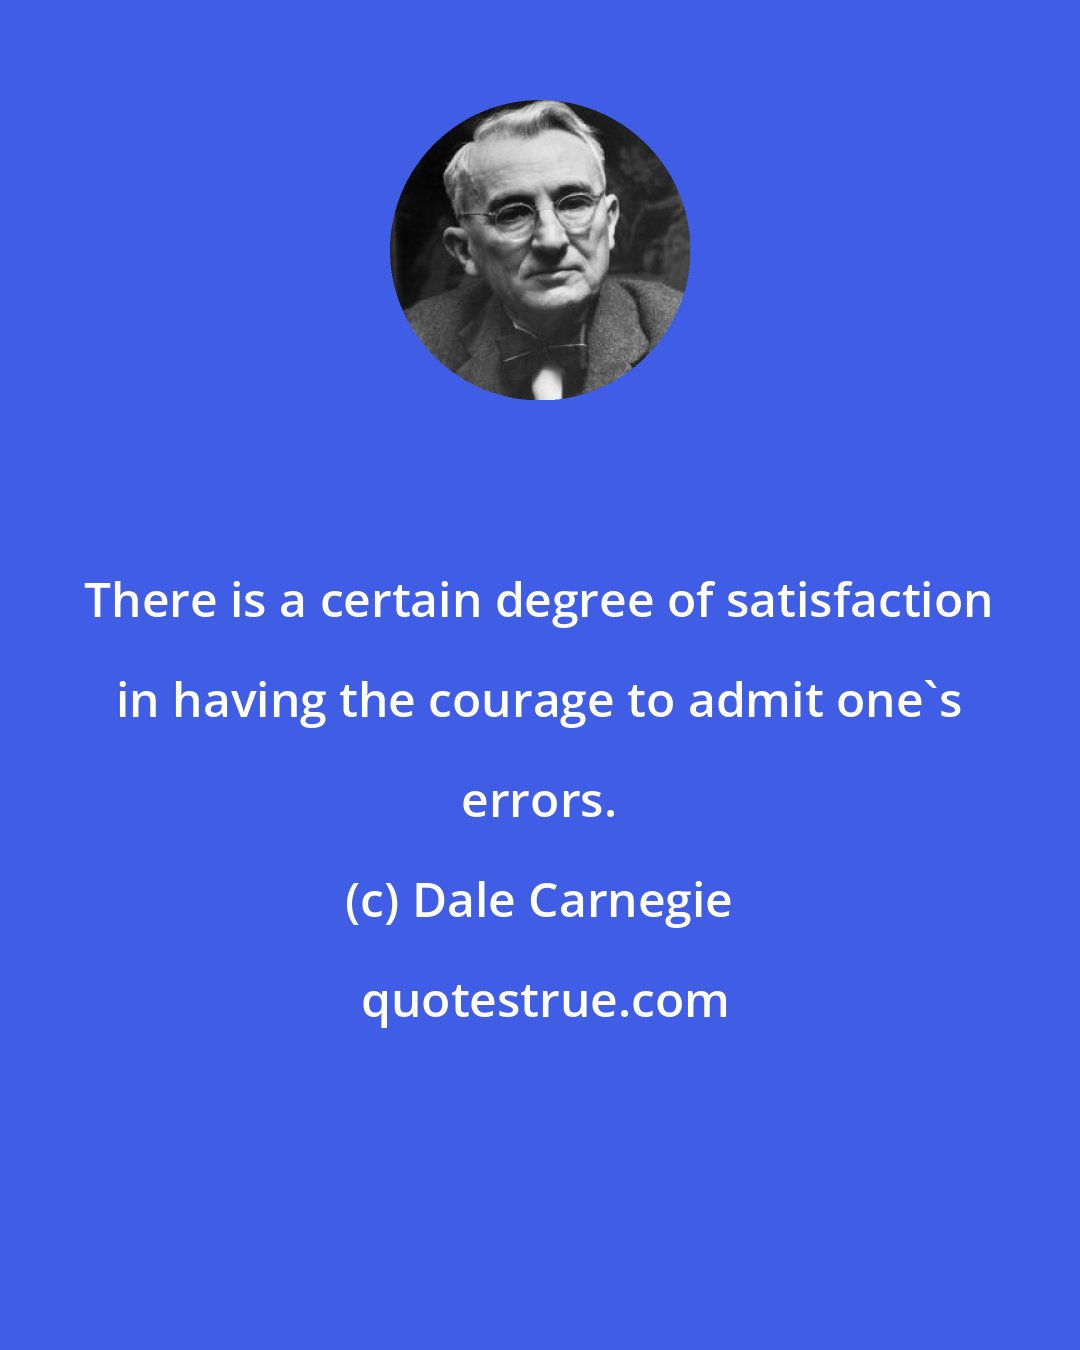 Dale Carnegie: There is a certain degree of satisfaction in having the courage to admit one's errors.